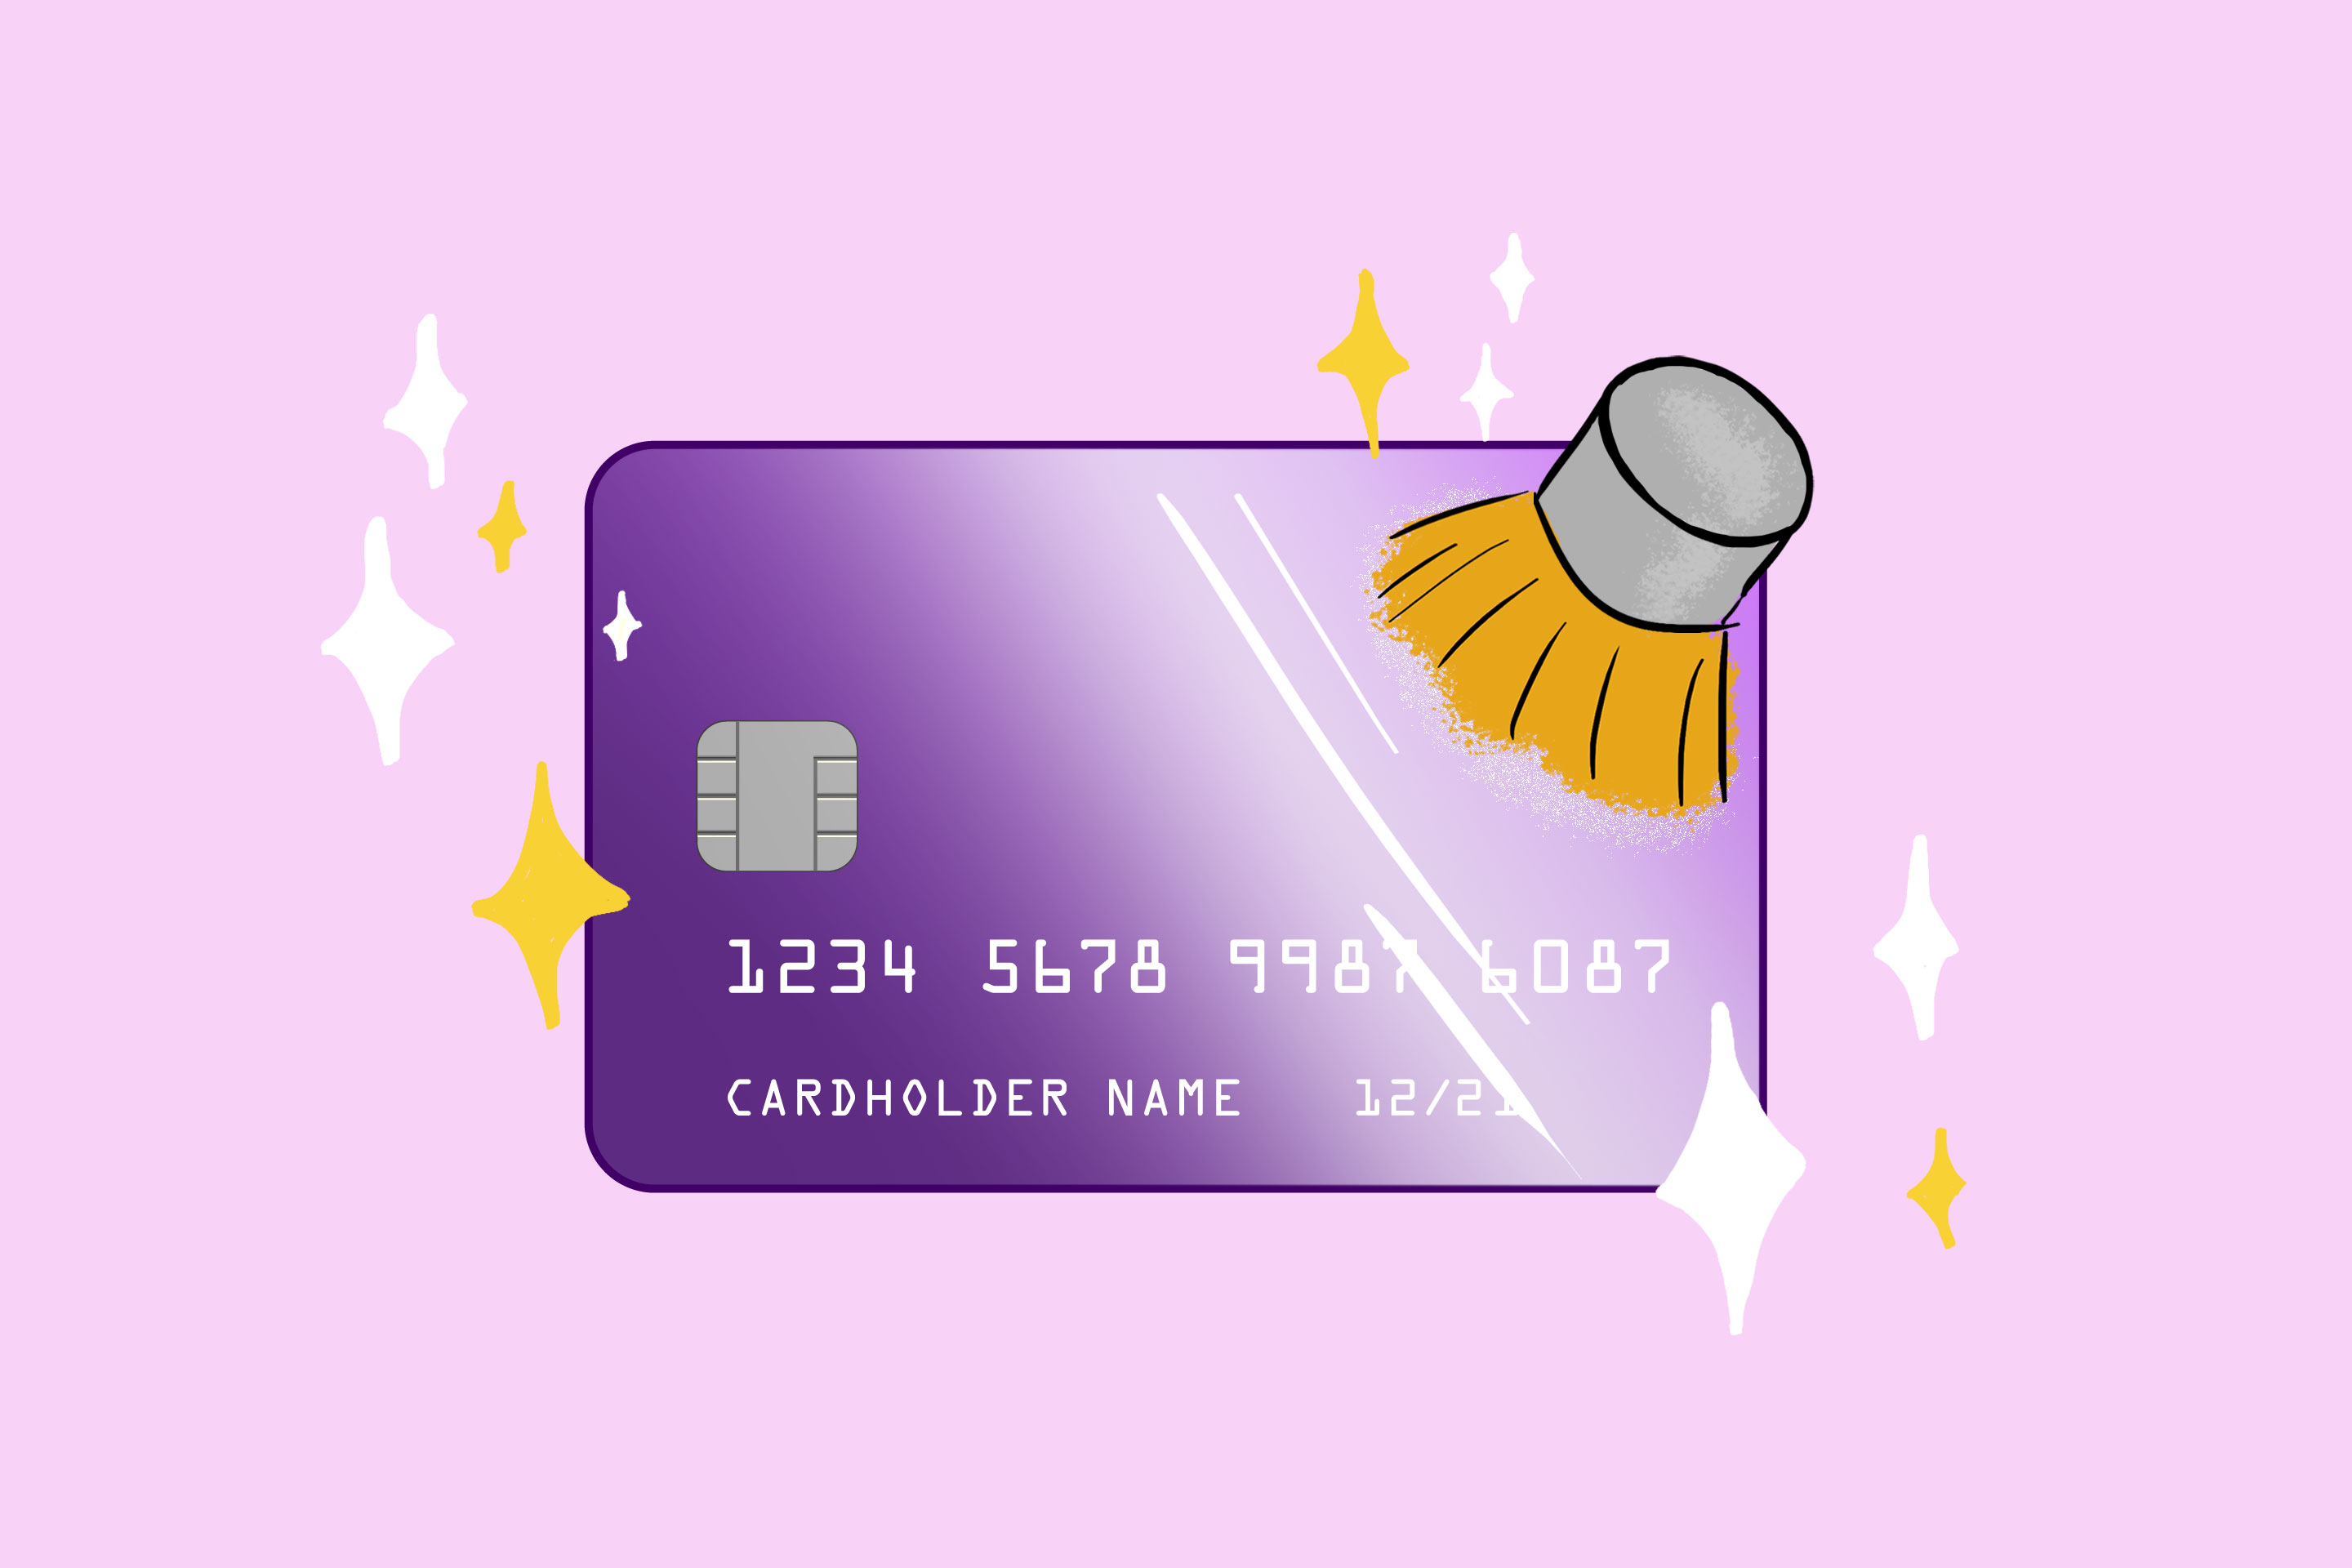 How to Use Credit Cards to Boost Your Credit Score During the Pandemic